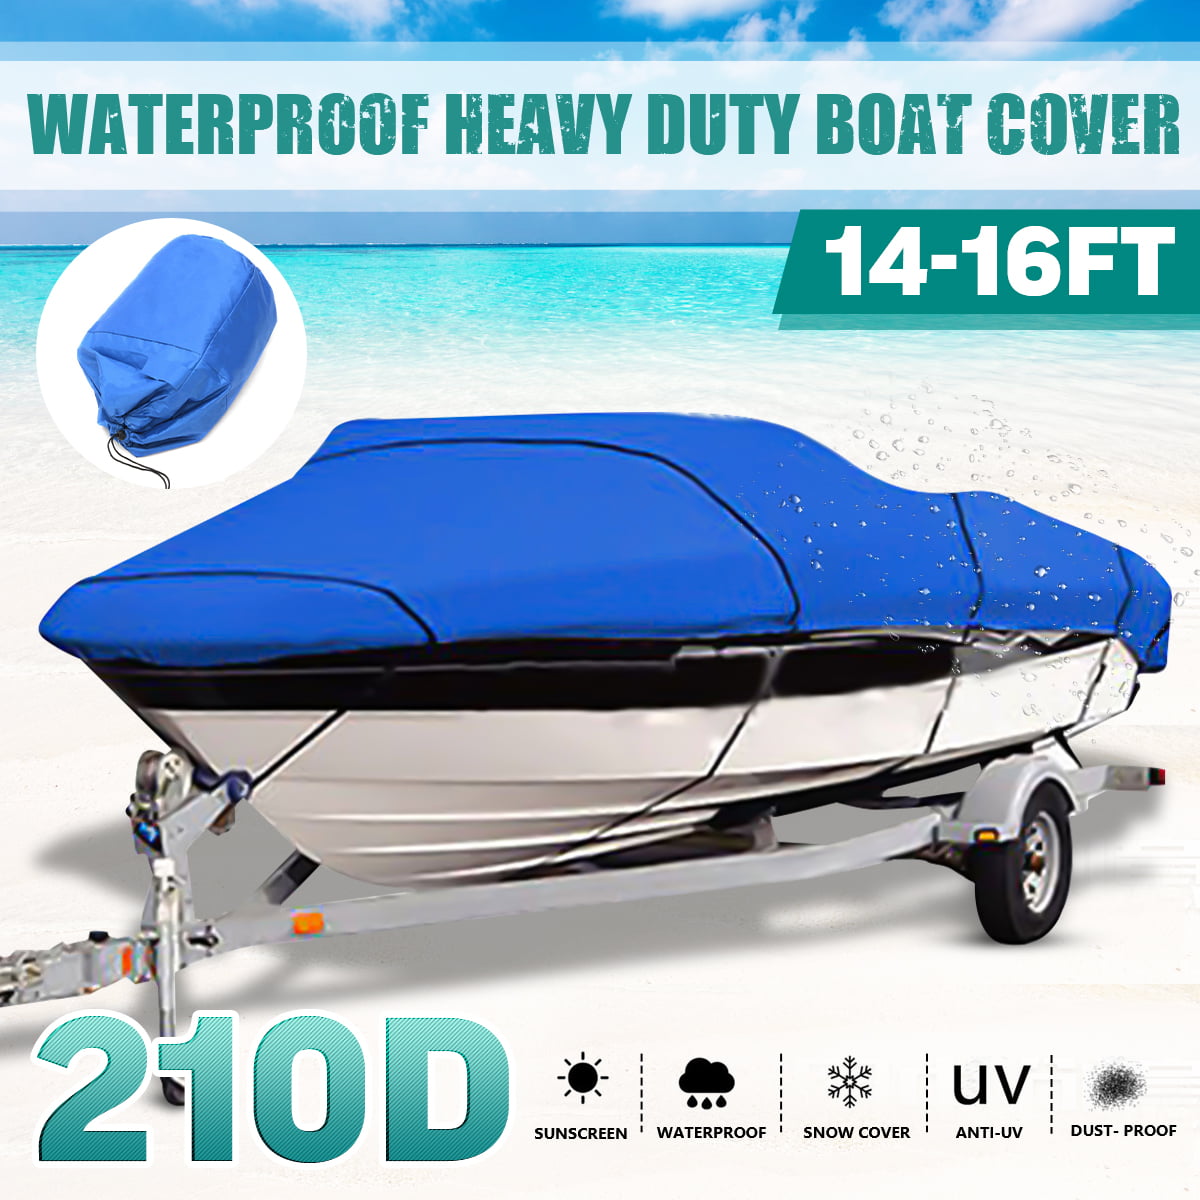 Fits Tri-Hull V-Hull Fishing Runabout Red,11-13FT UV Resistant Marine Grade Outboard Cover Boat Cover 210D Bass Boat Cover Heavy Duty Waterproof Trailerable Boat Covers 